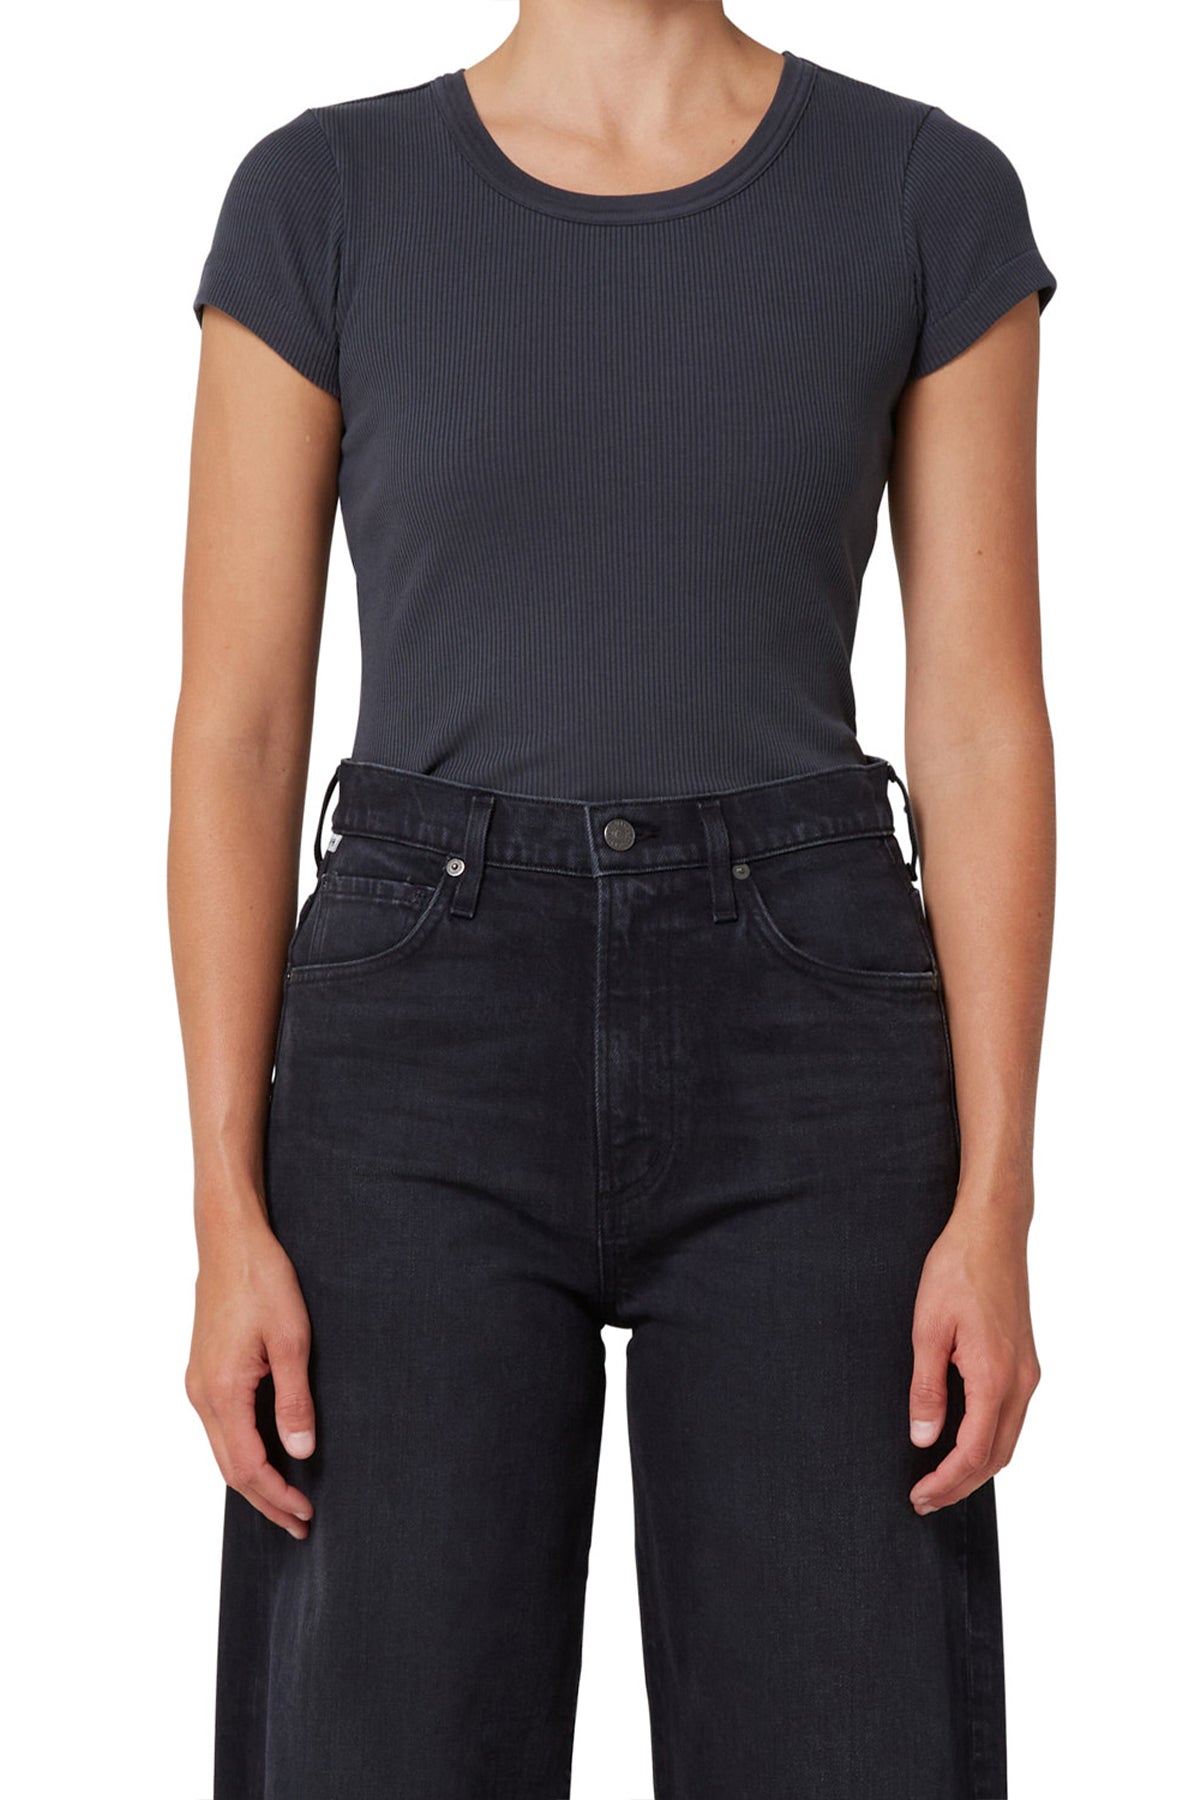 Pierre Tee in Charcoal - shop-olivia.com